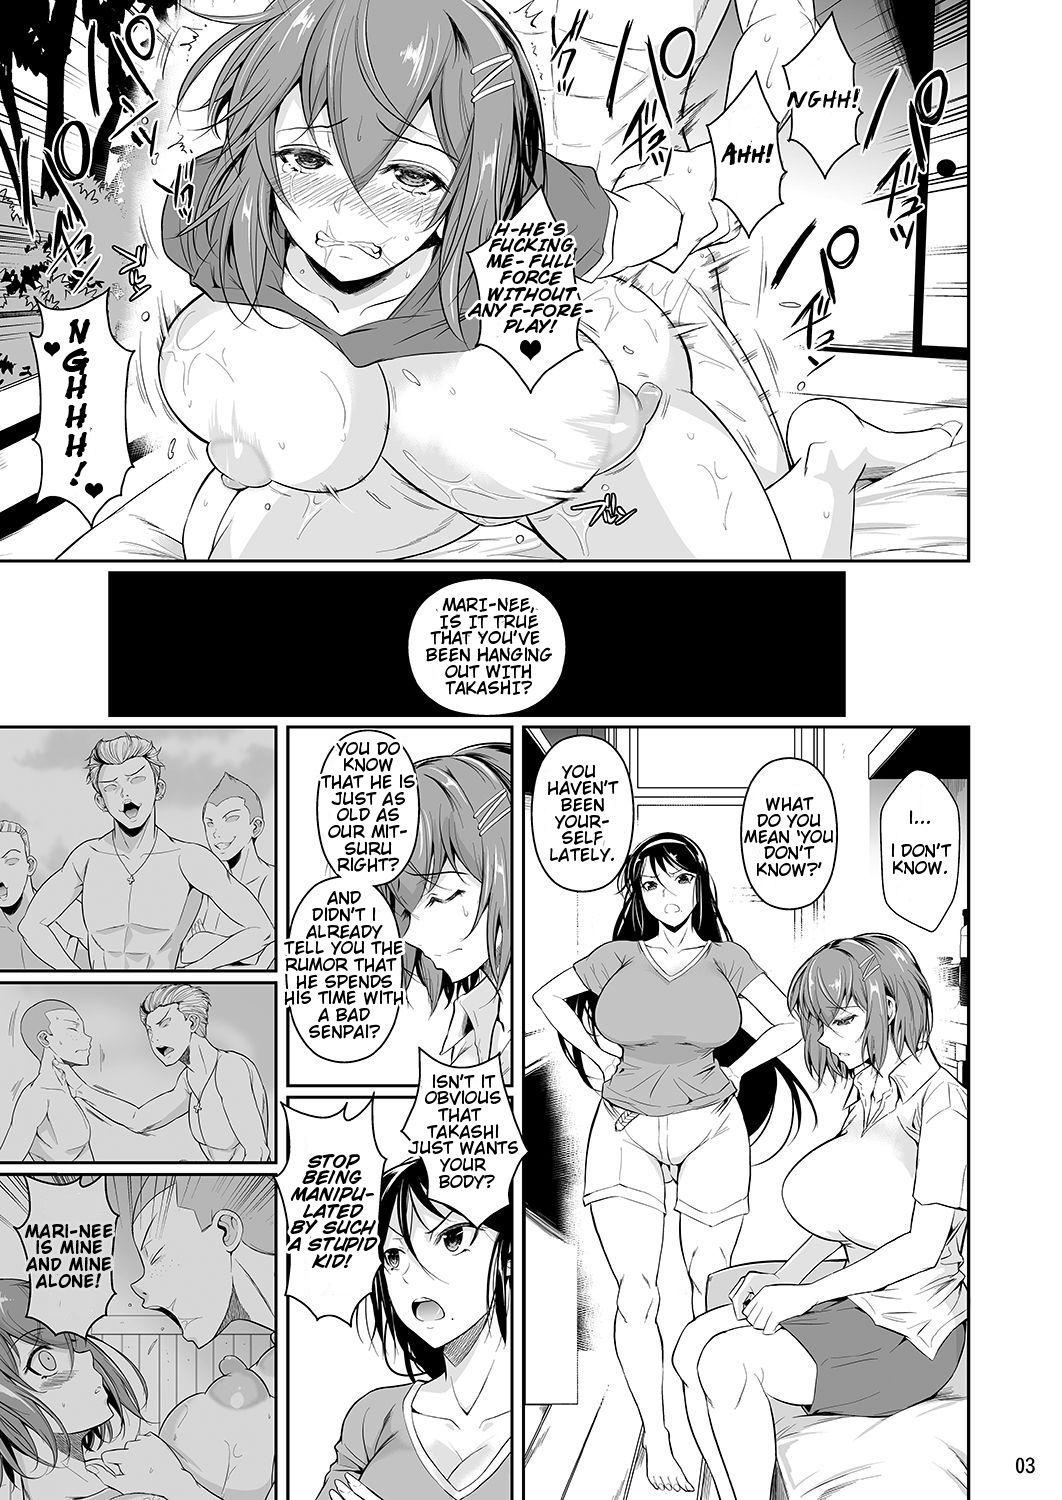 Old And Young Touchuukasou 4 - Original Argentino - Page 4